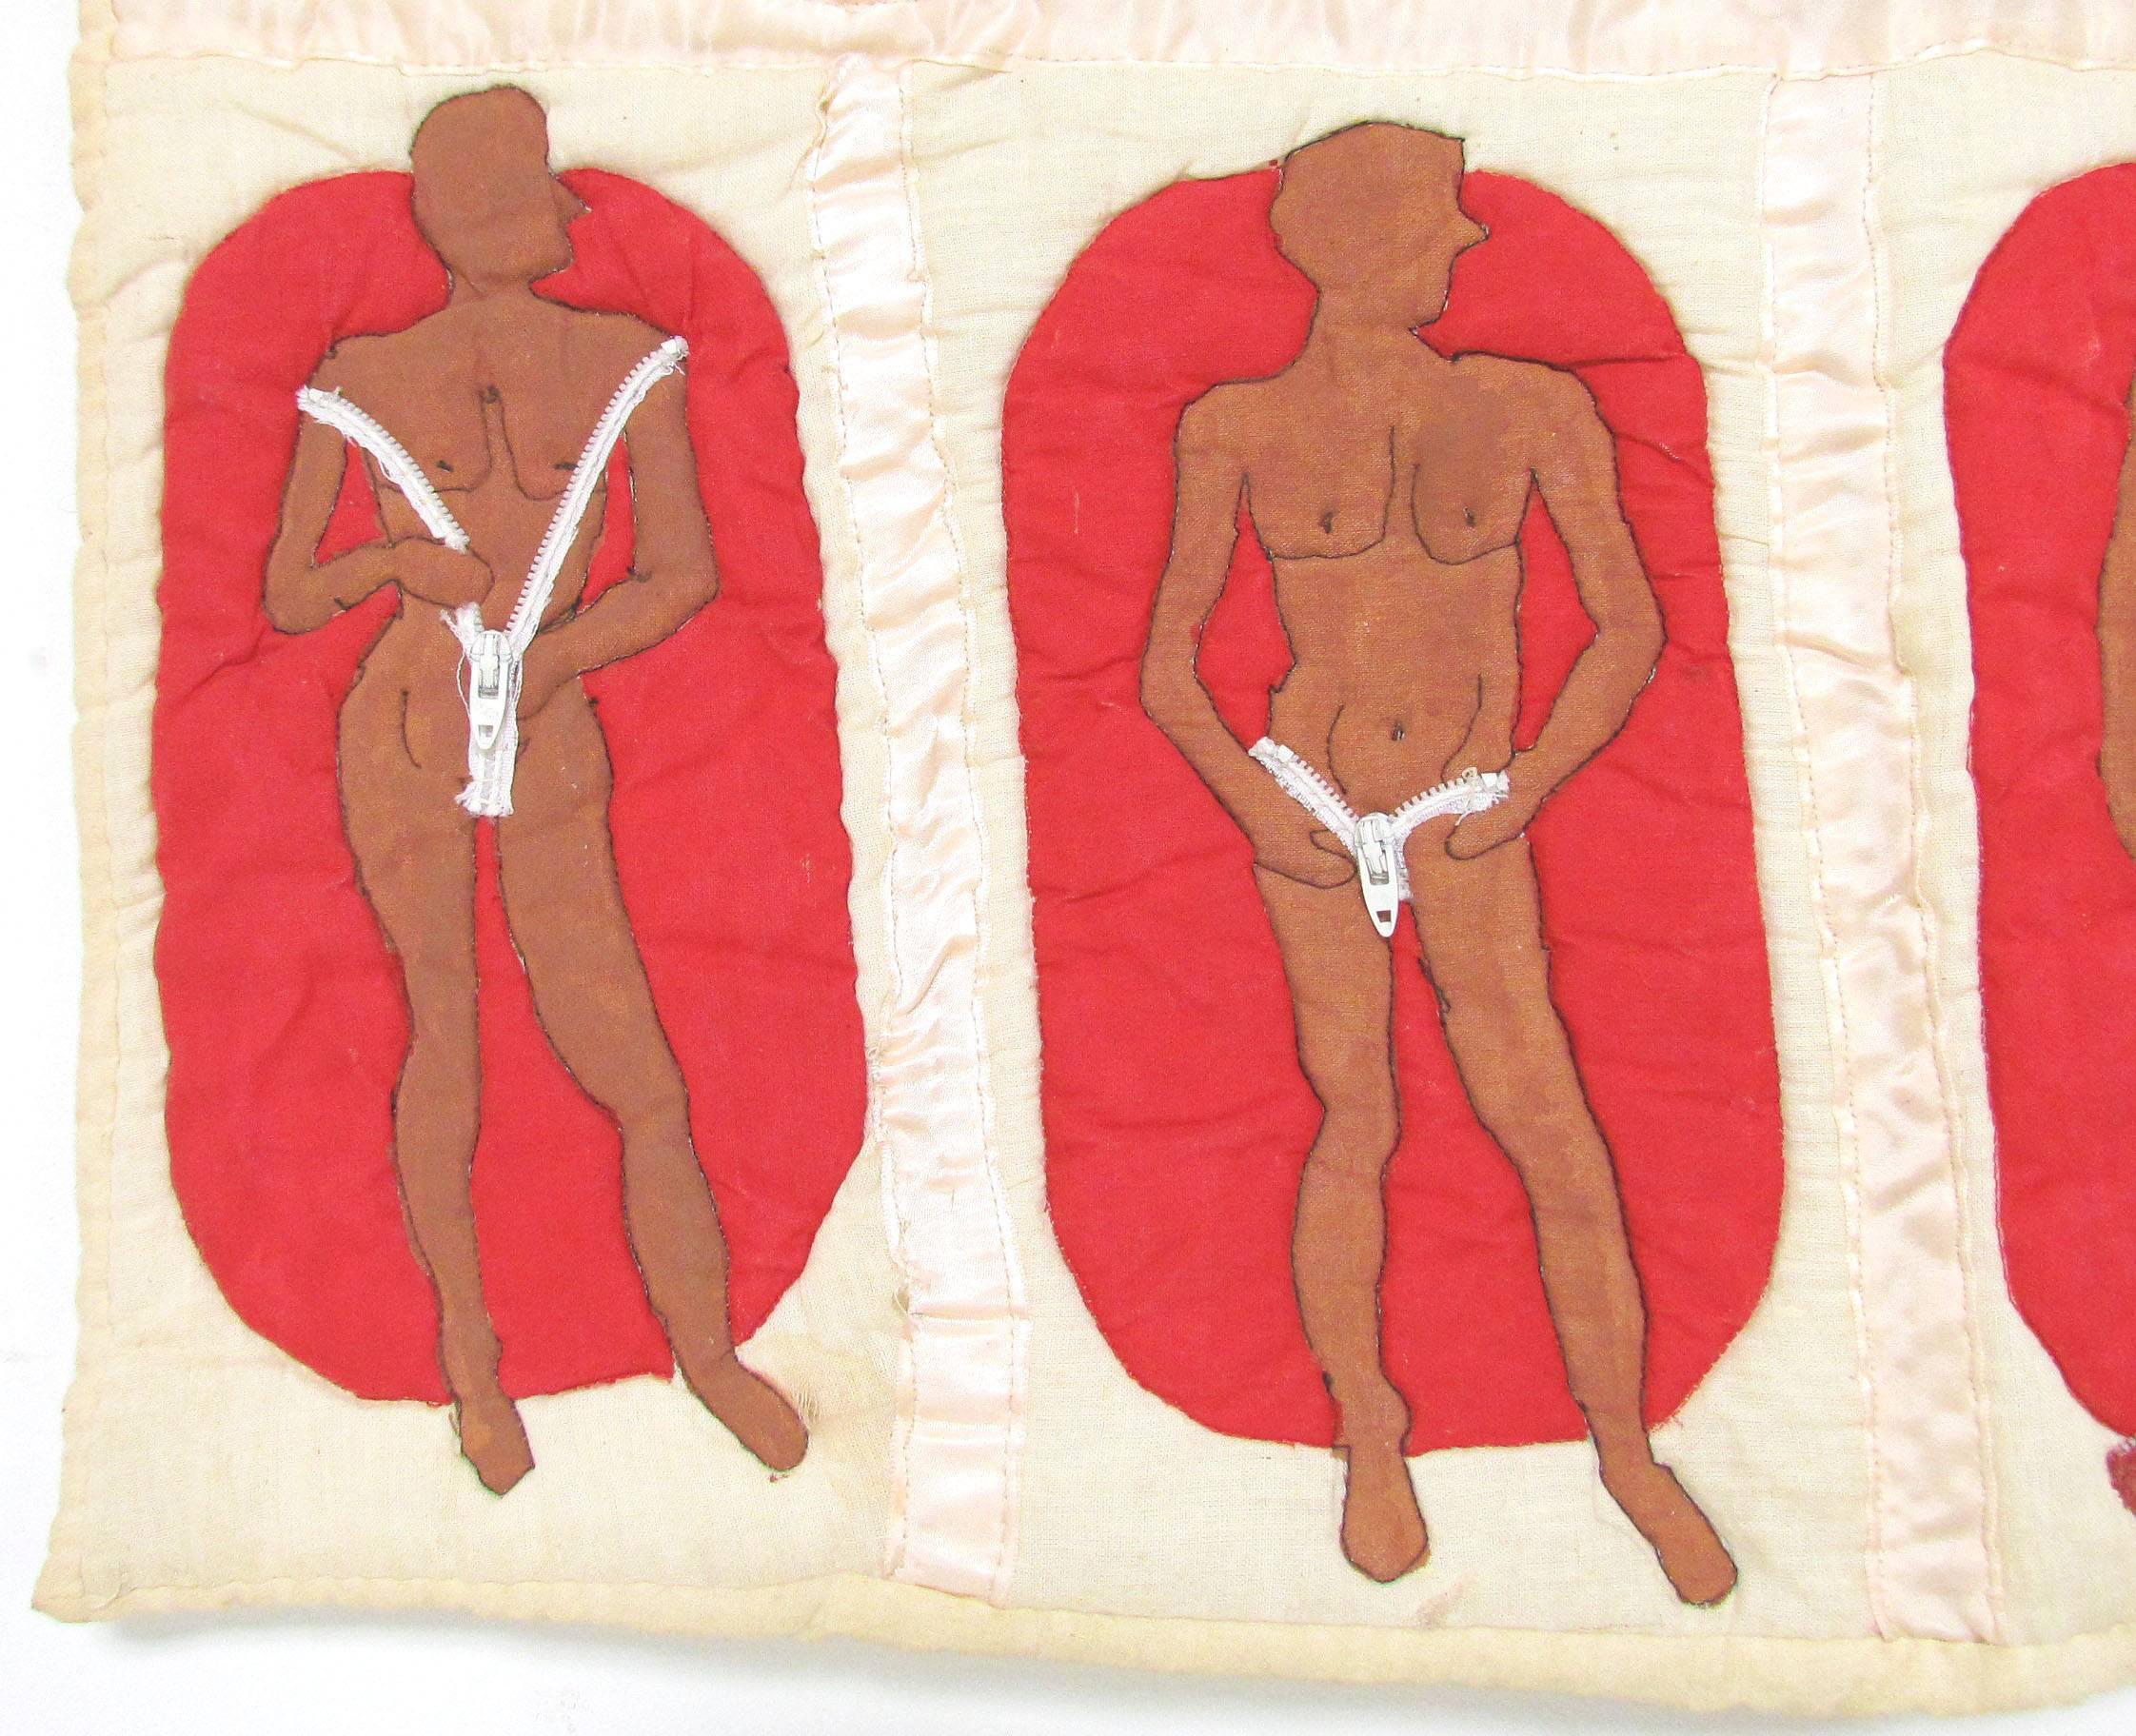 Late 20th Century Rare 1970s Handmade Textile Art Wall Hanging Depicting Gender Transformation